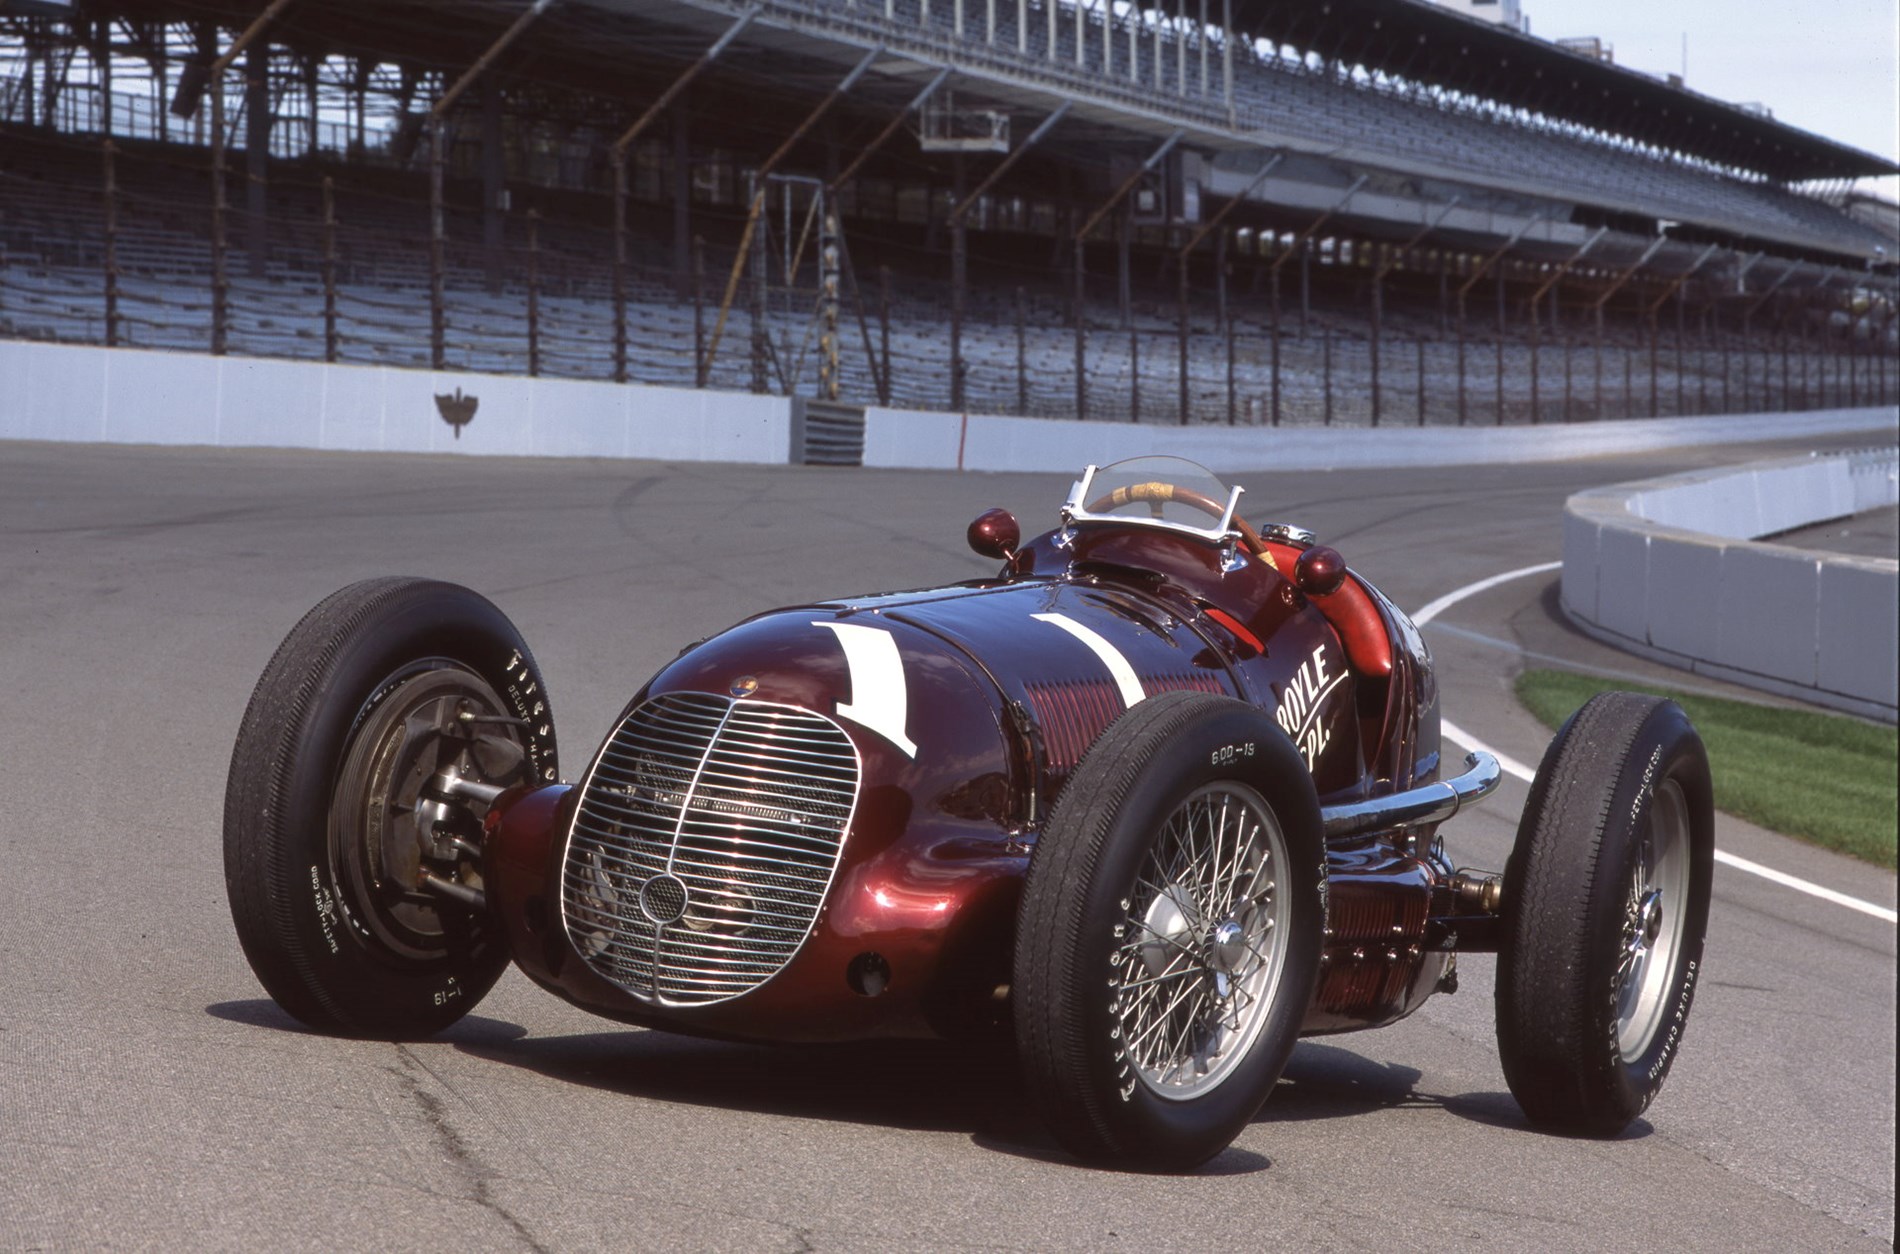 Maserati commemorates the American victories of the 8CTF at the Indianapolis 500